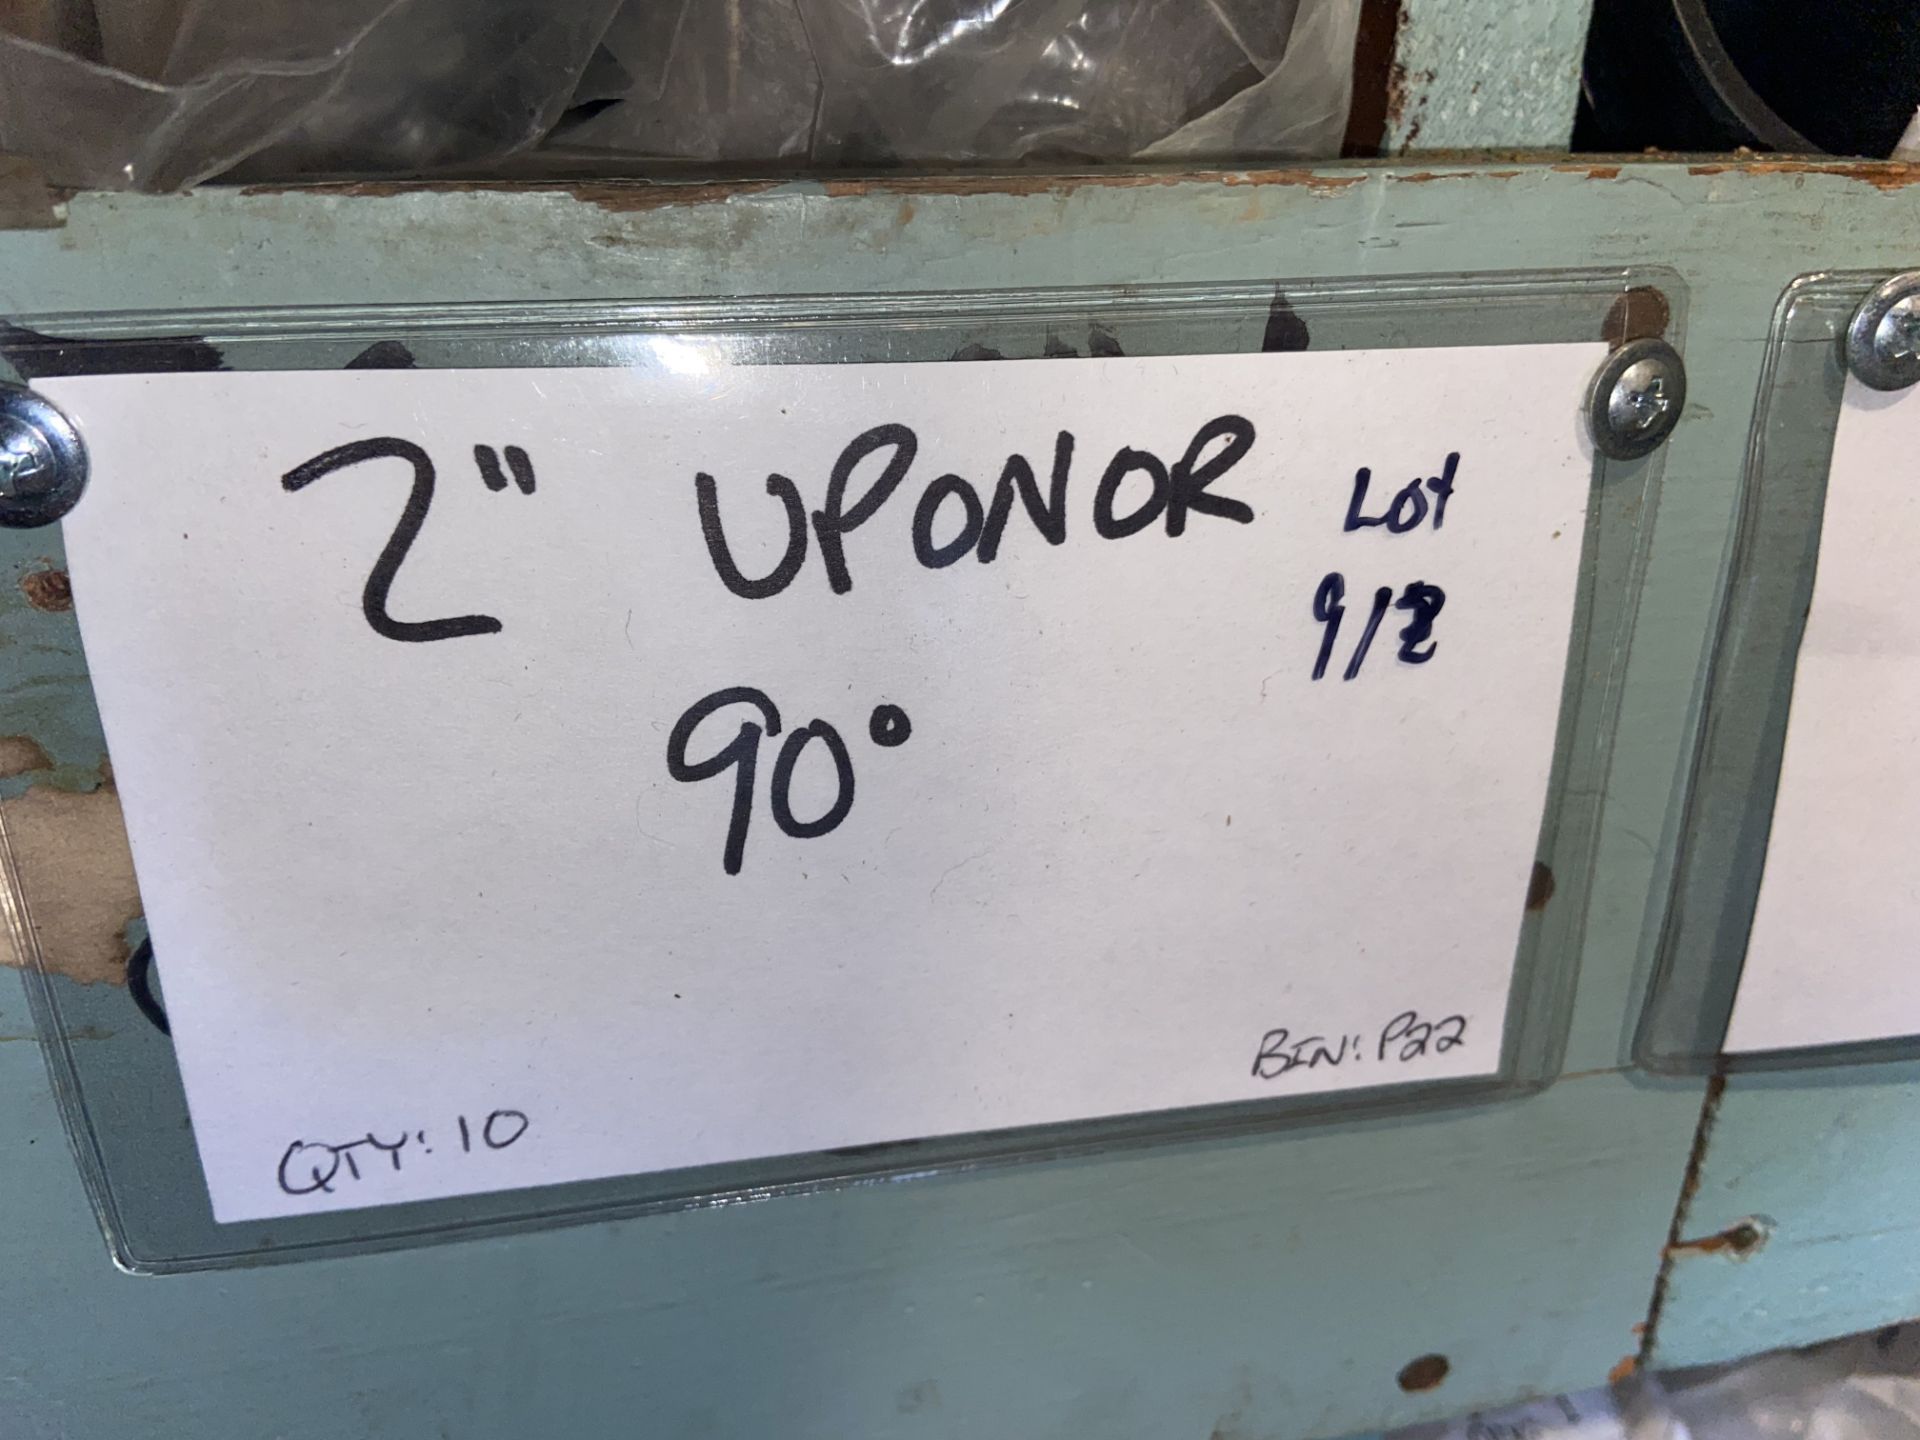 Uponor Reducer 1 1/2" x 3/4" (3) 1 1/2" x 1" (13) 1 1/2" x 1 1/4" (8) (LOCATED IN MONROEVILLE, PA) - Image 2 of 2